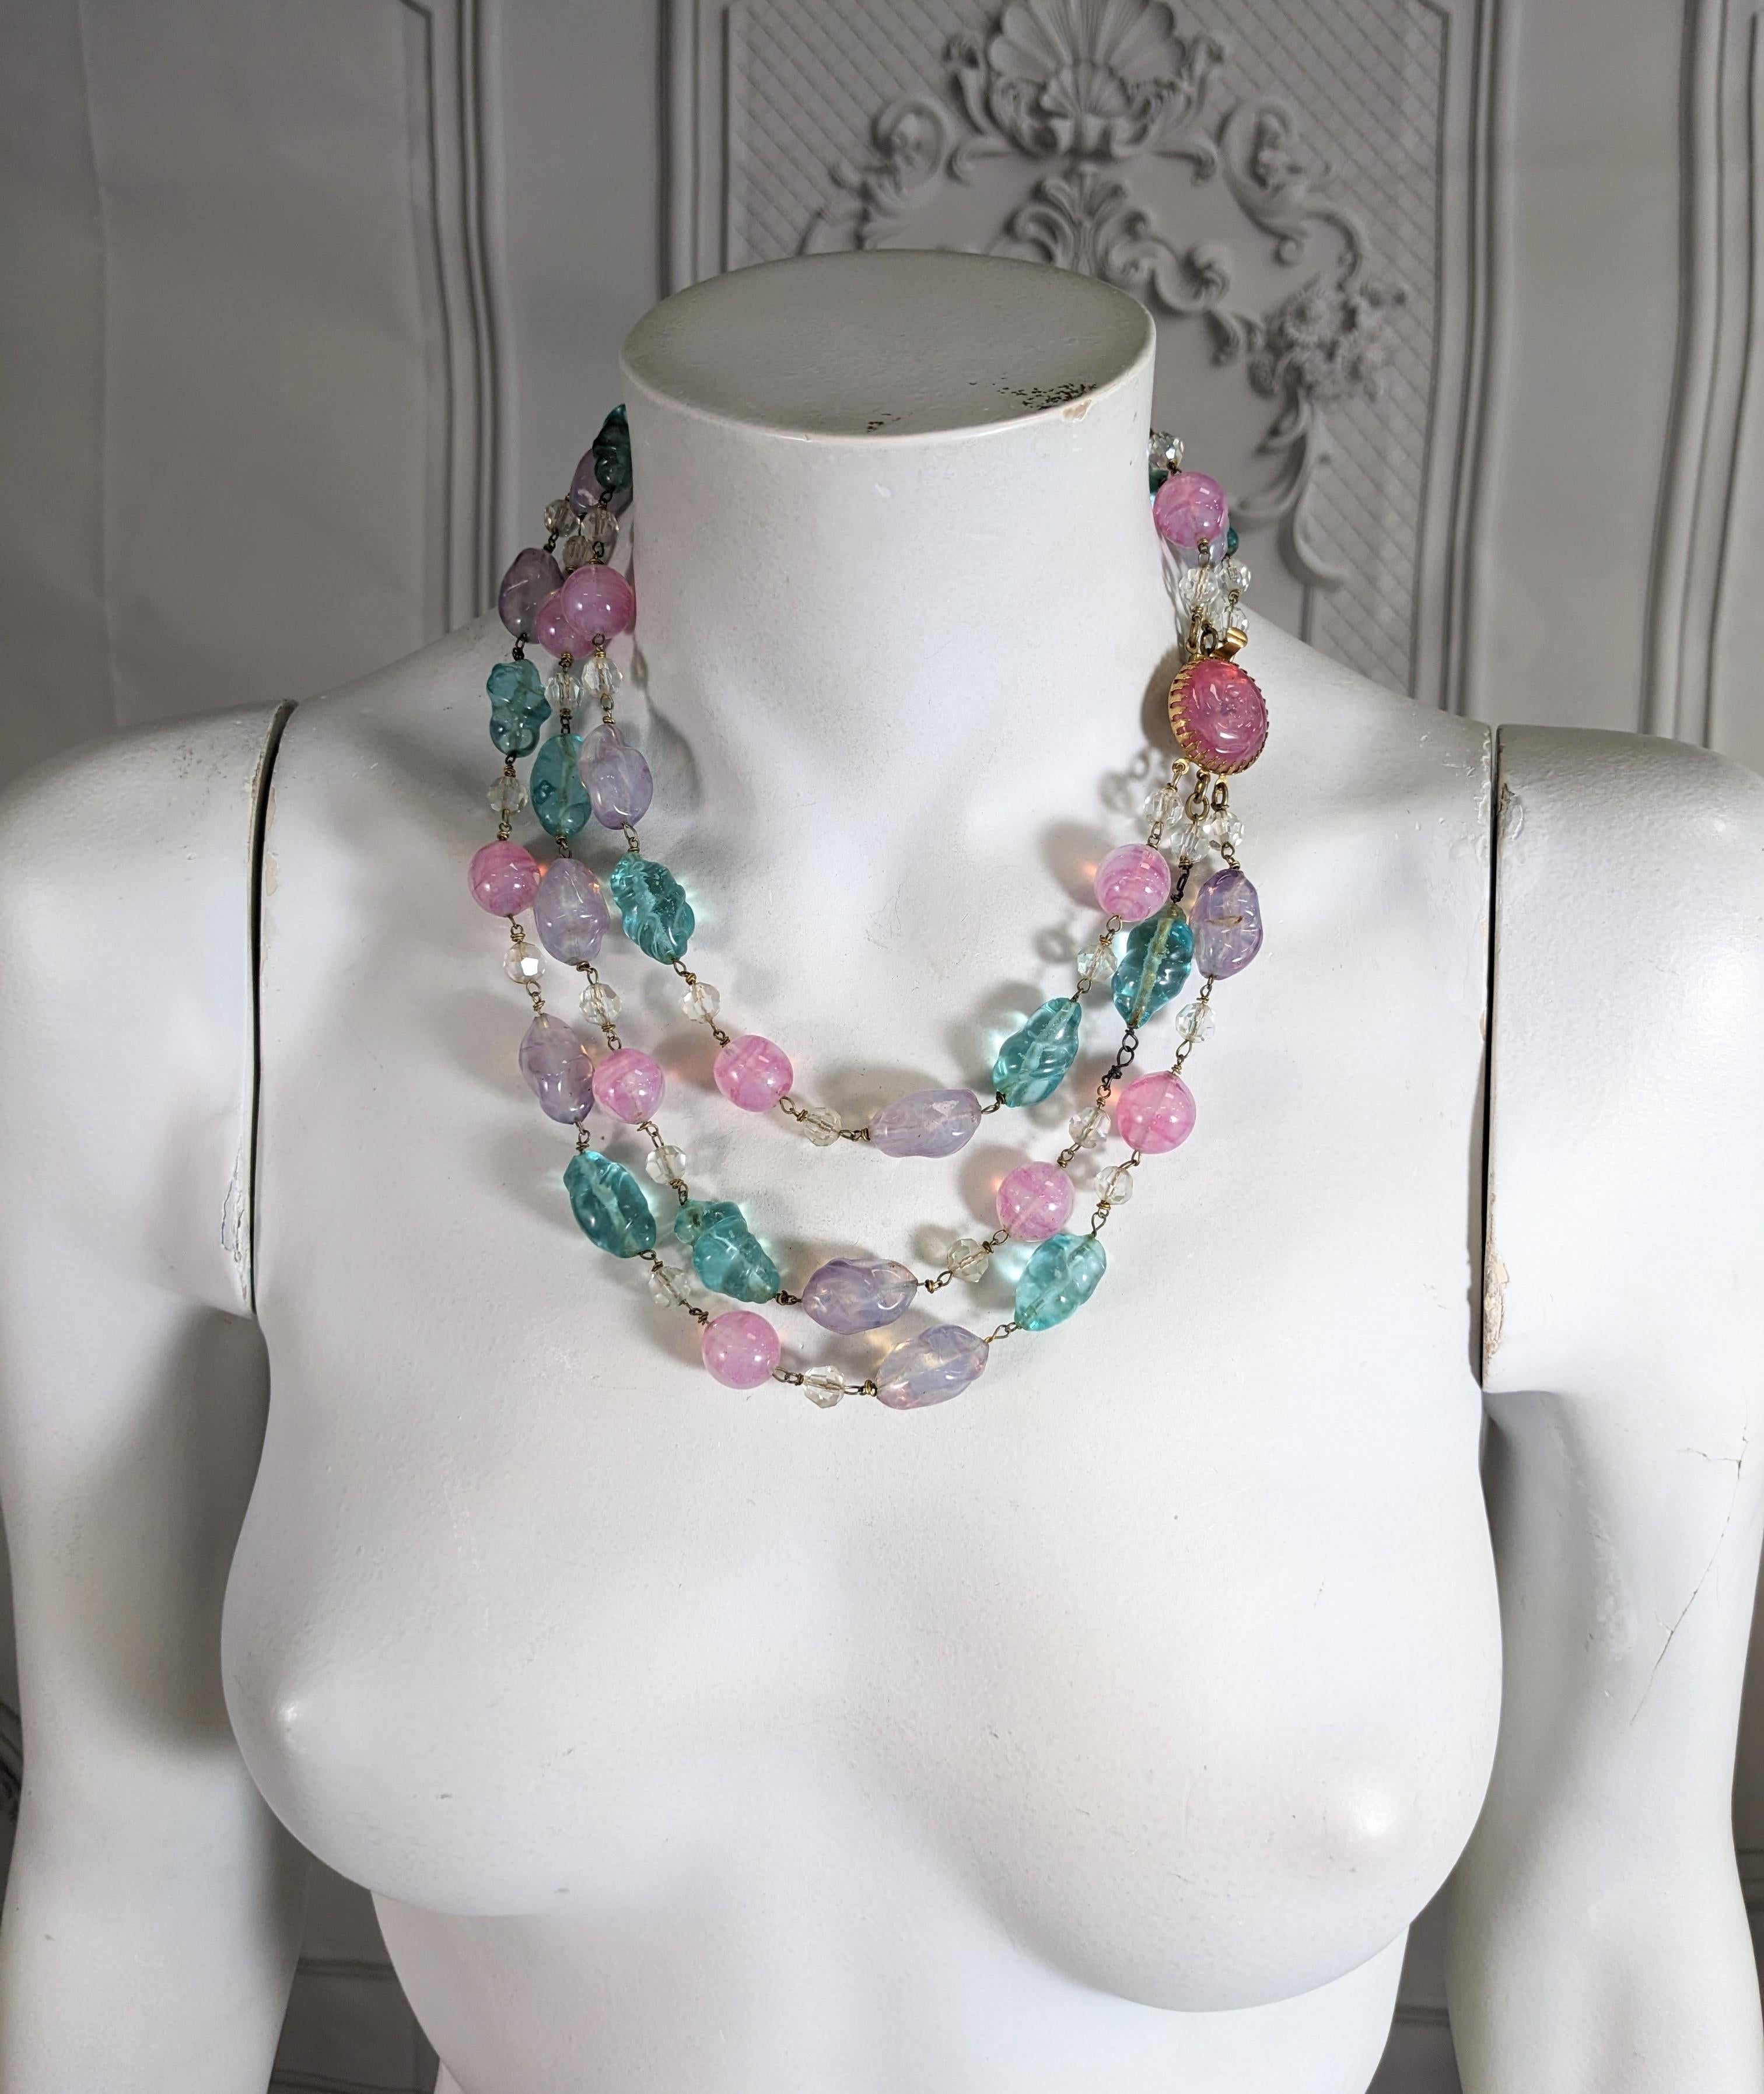 Louis Rousselet Pastel Bead Necklace In Excellent Condition For Sale In New York, NY